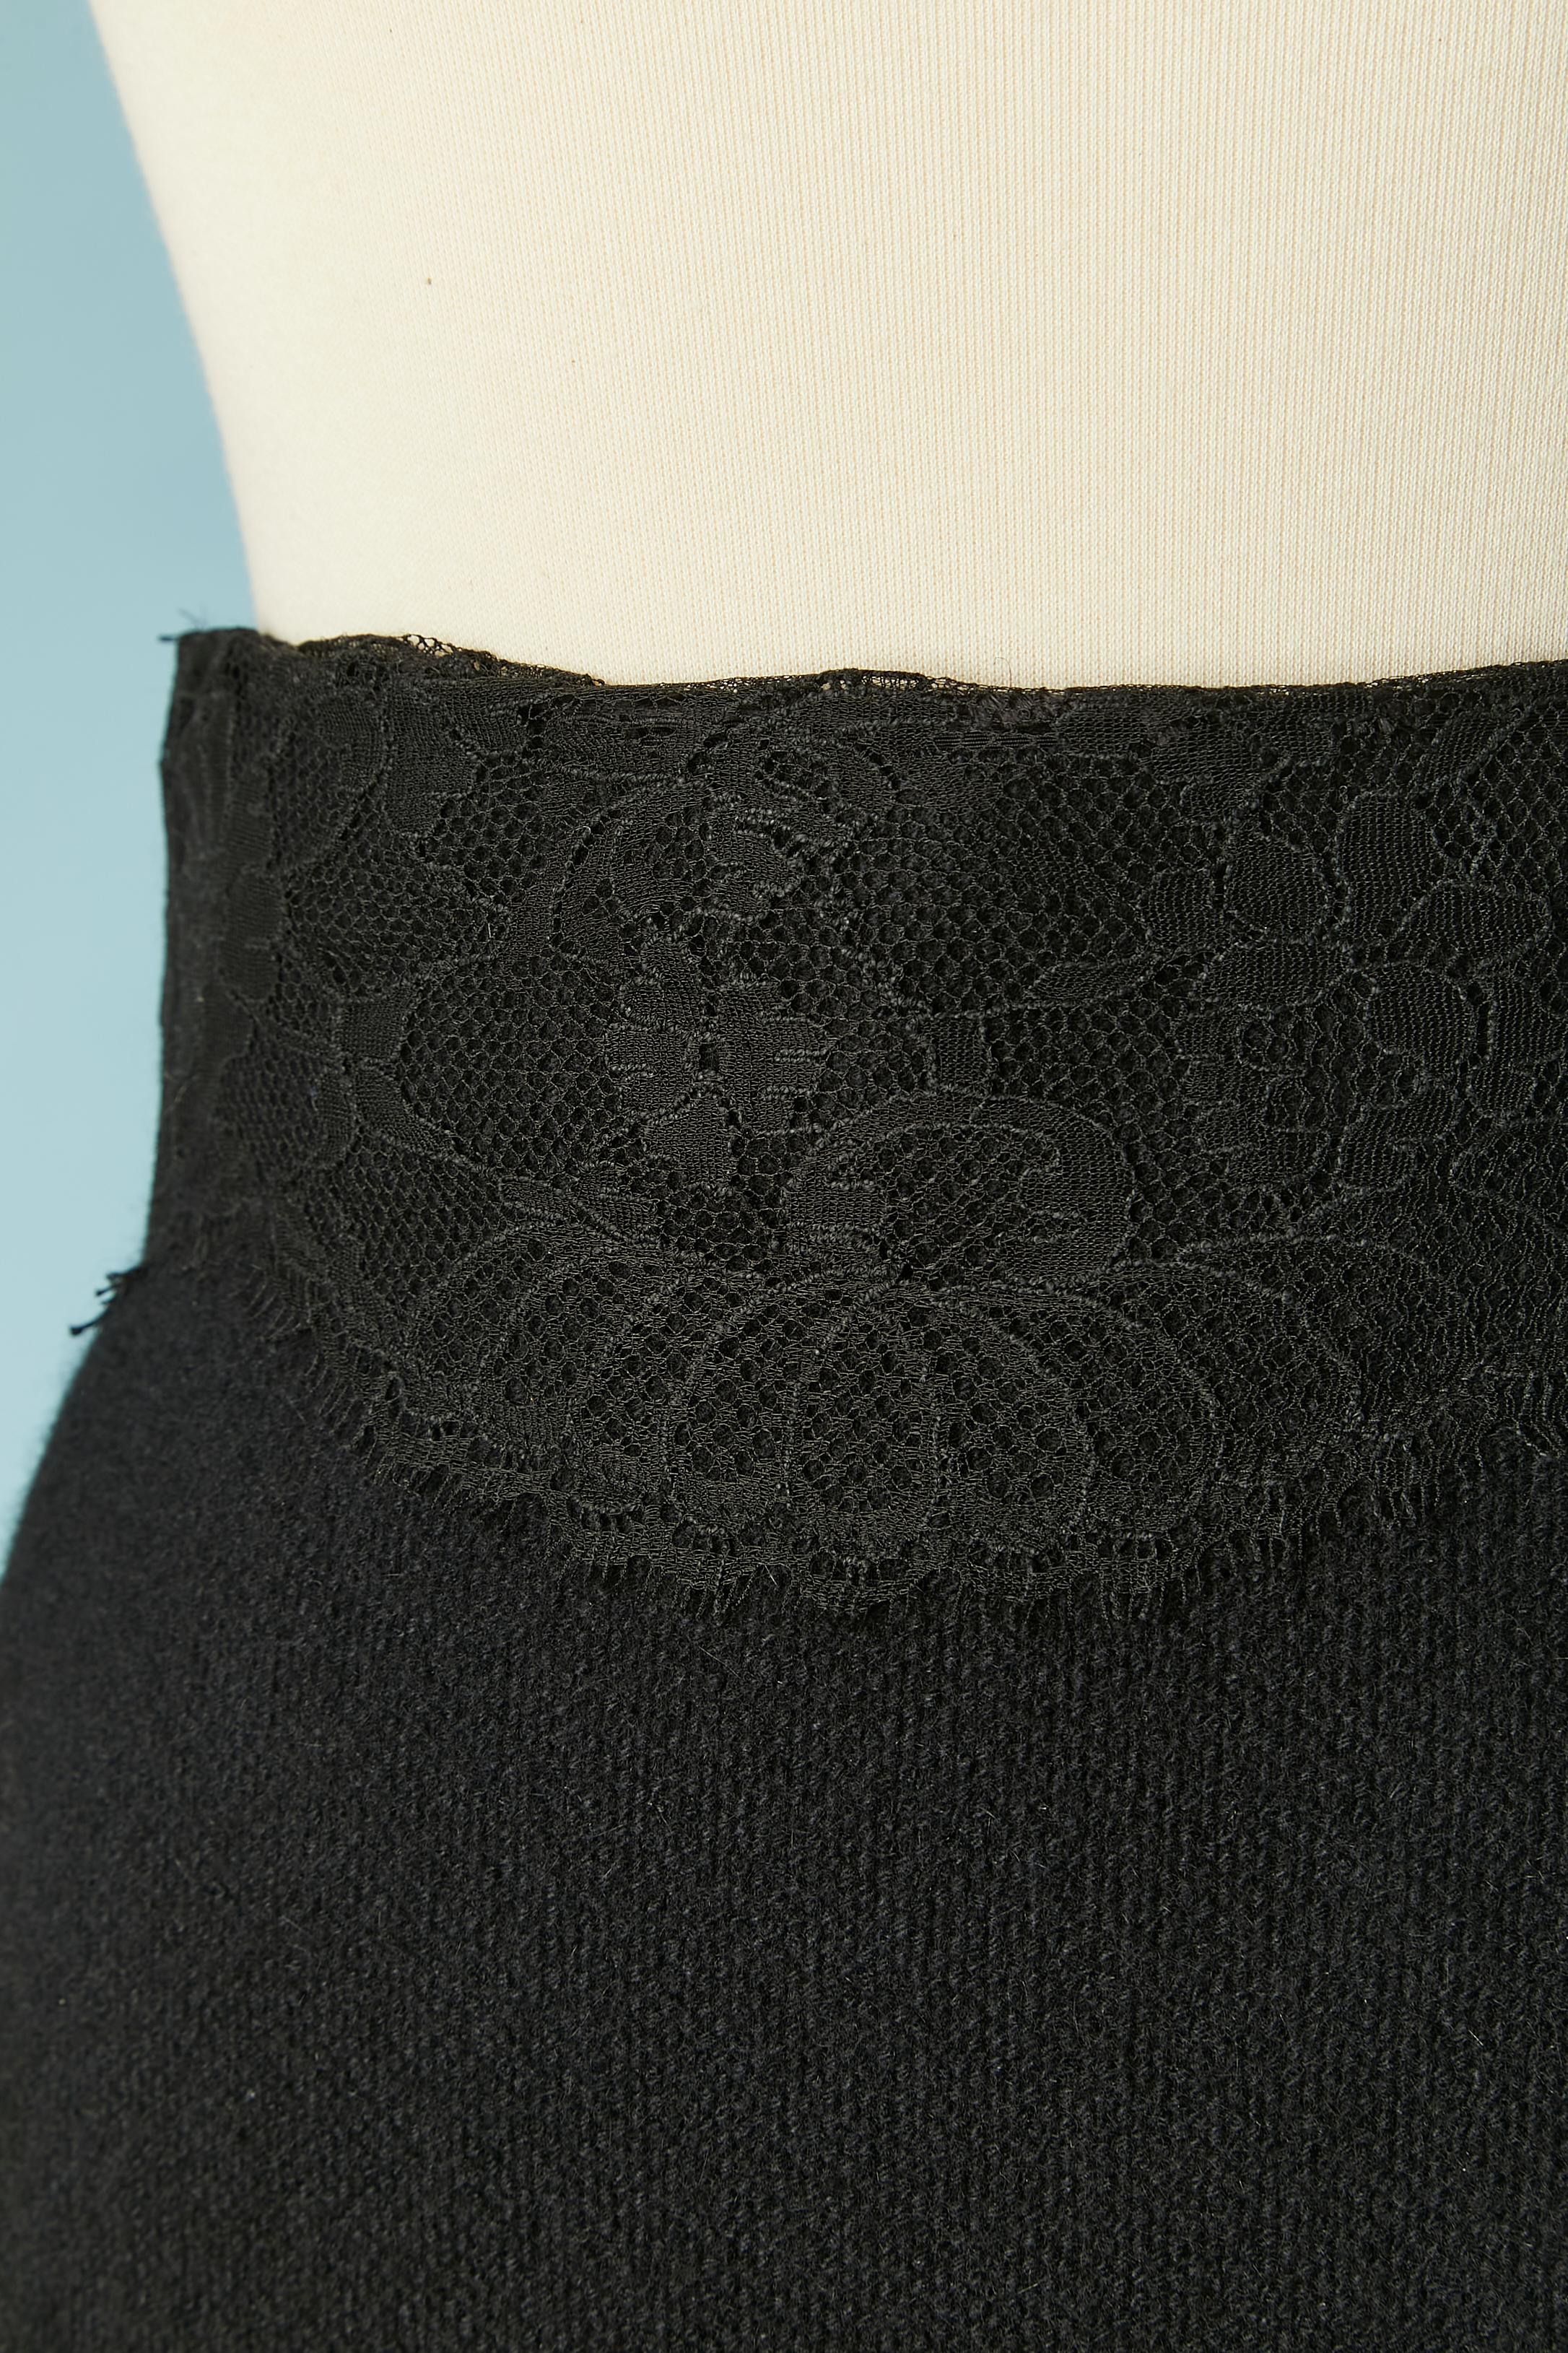 High-waisted Black knit wool skirt with black lace edge on the top and bottom.
Silk lining. Zip and hook&eye on the left side.
Gros-grain inside the waist with hook&eye closure
SIZE XS